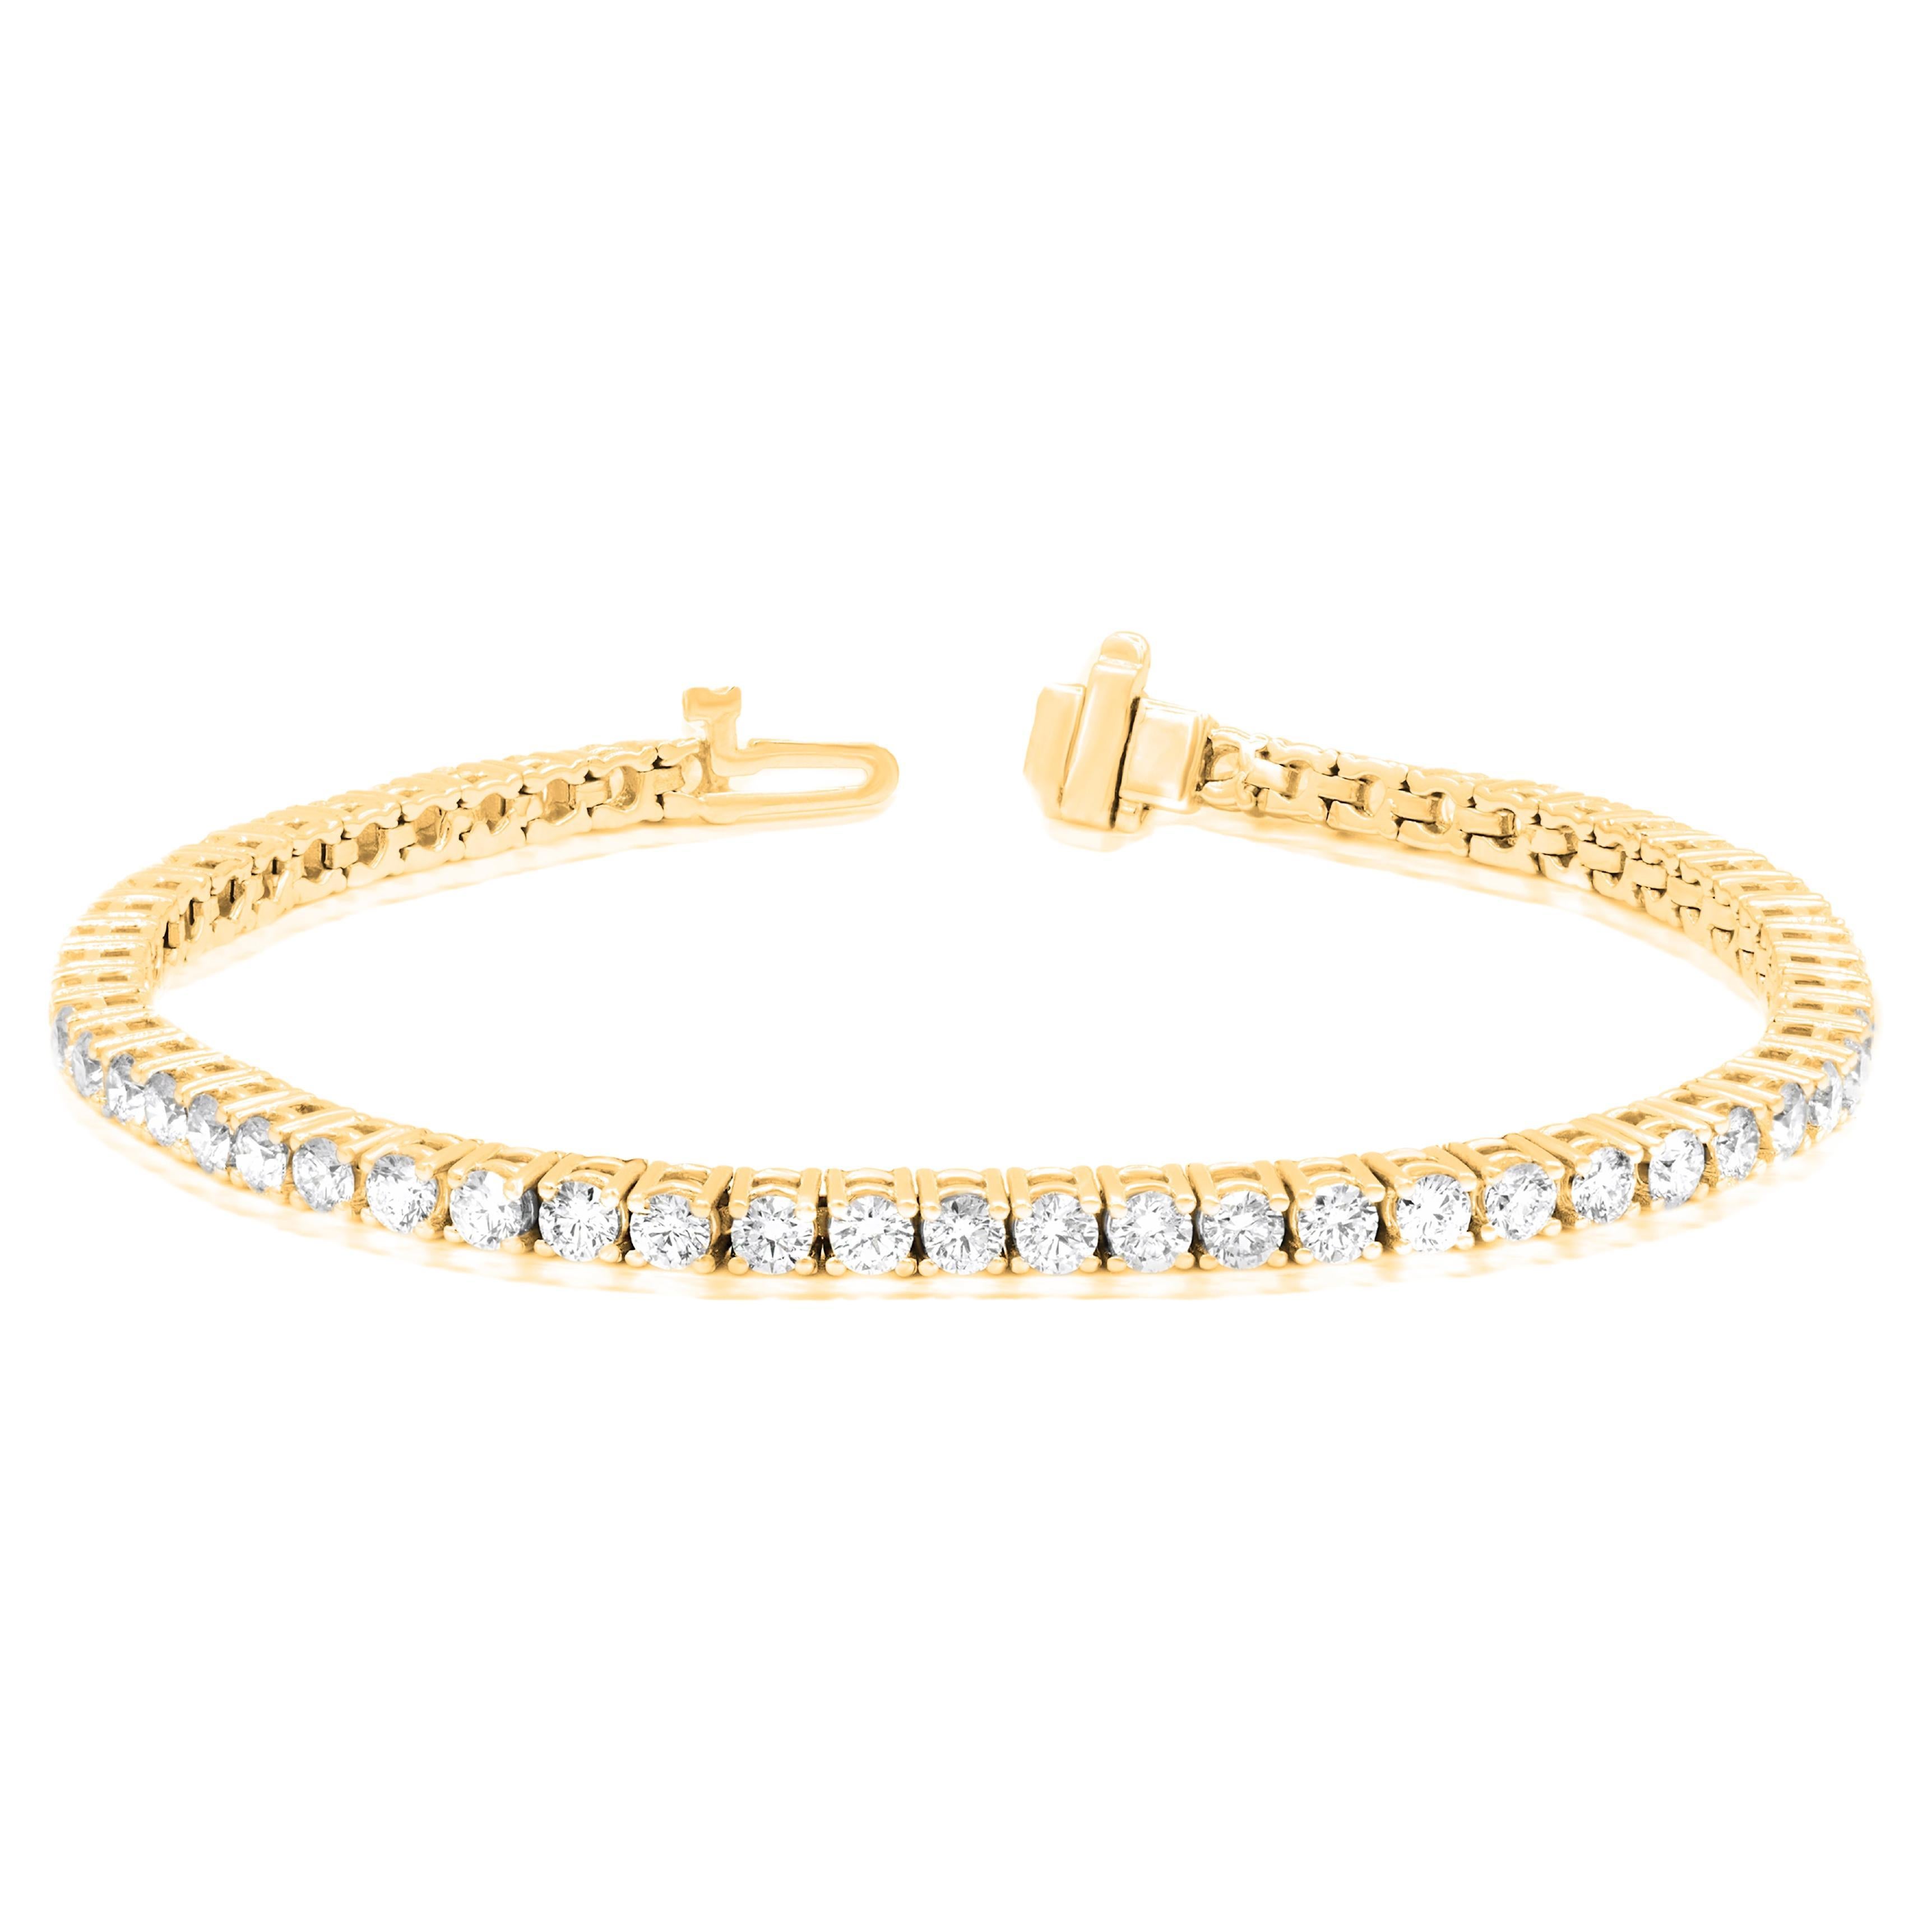 Diana M.14kt yellow gold tennis bracelet featuring 4.00 cts tw of round diamonds